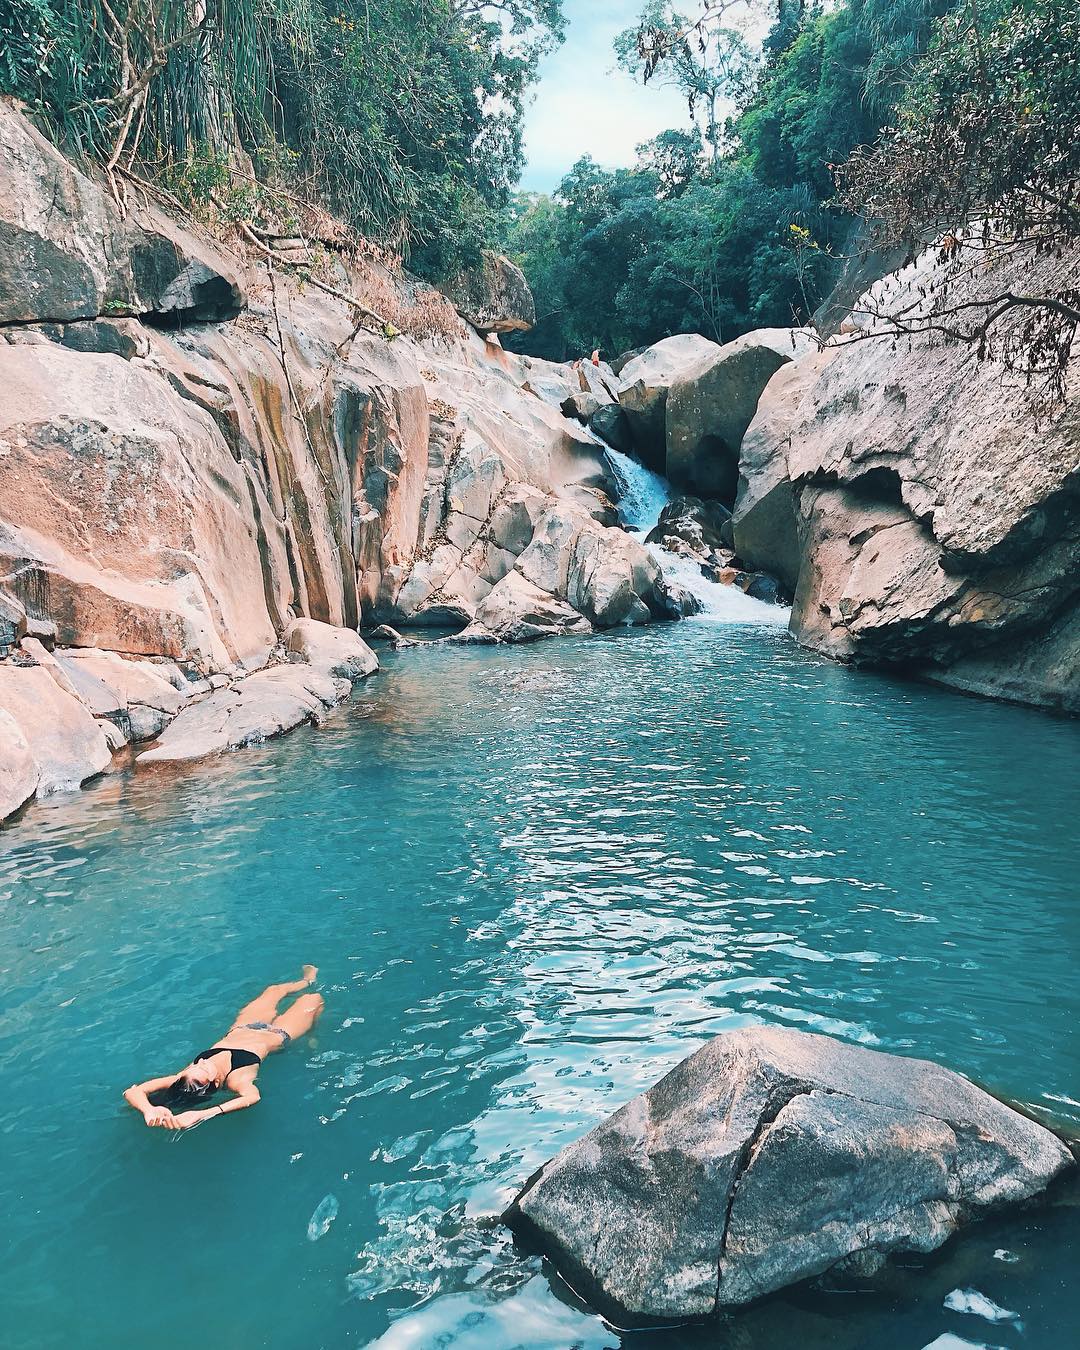 Take the plunge! Swimming in the crystal blue waters of Ba Ho is an amazing experience